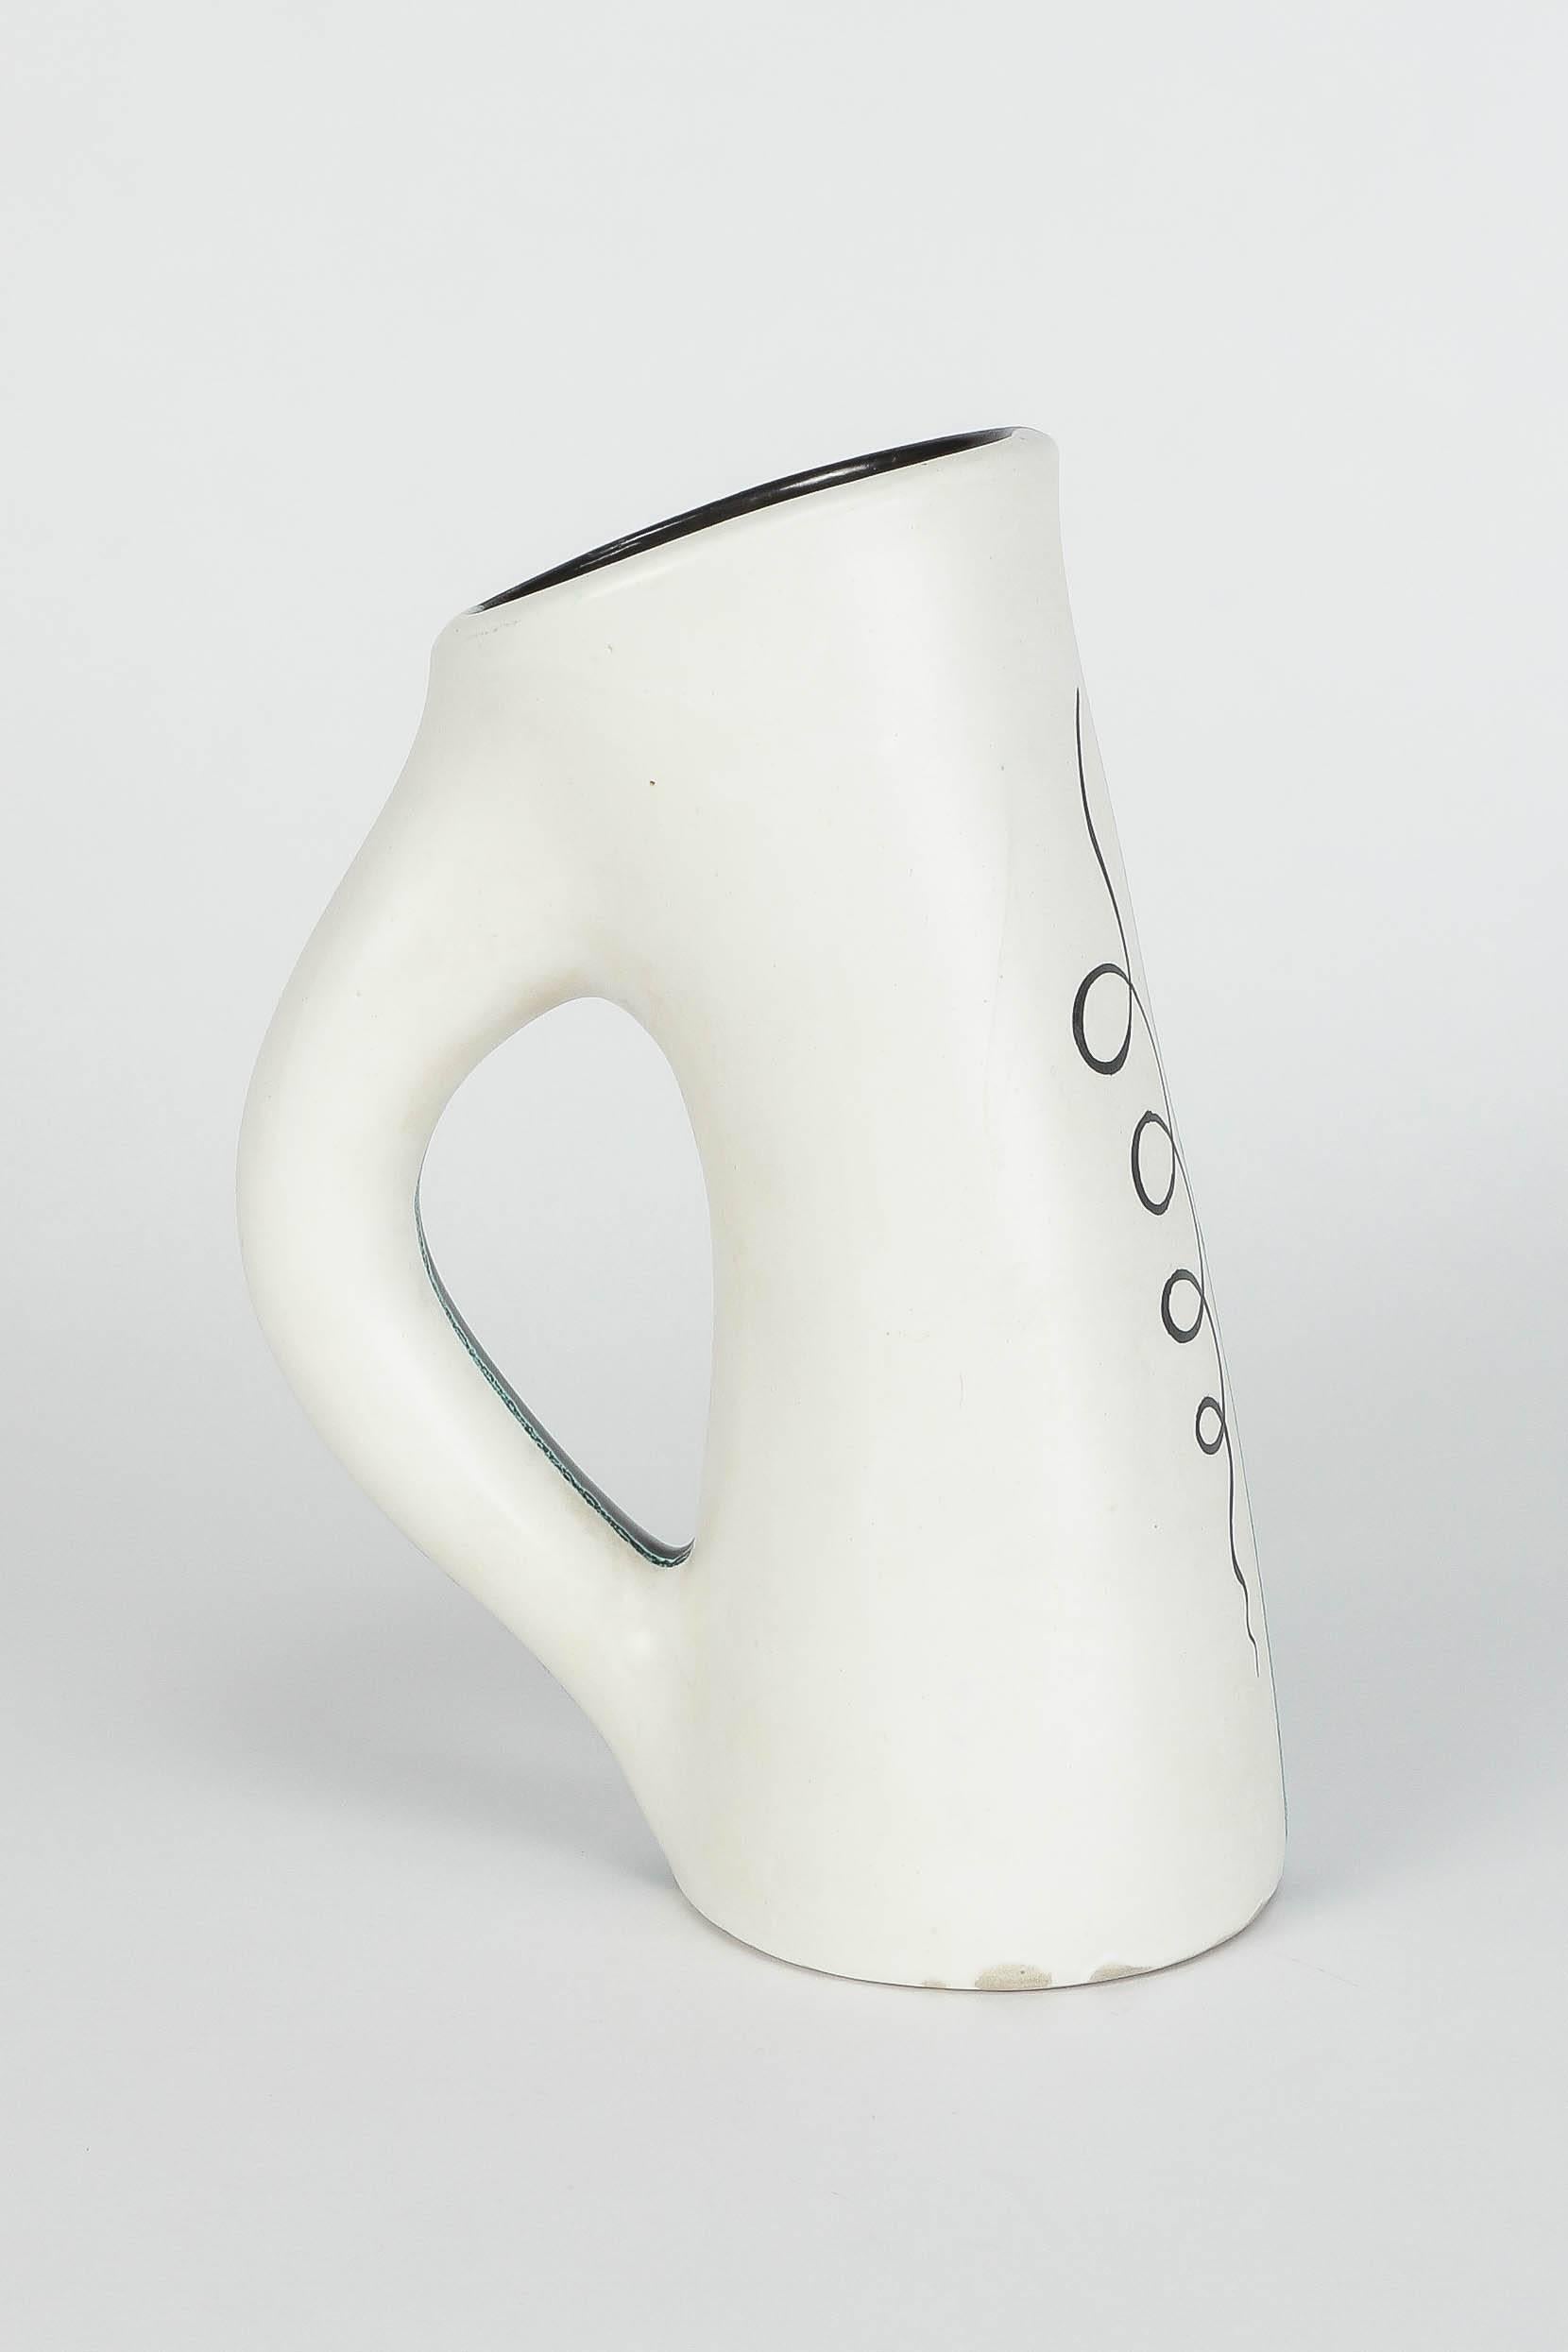 French pottery pitcher by Charles René Neveux for the renowned ceramic atelier Cerenne of Vallauris, manufactured in the 1950s. On one side white and black on the other, slightly blue in the middle. Signed to bottom with.